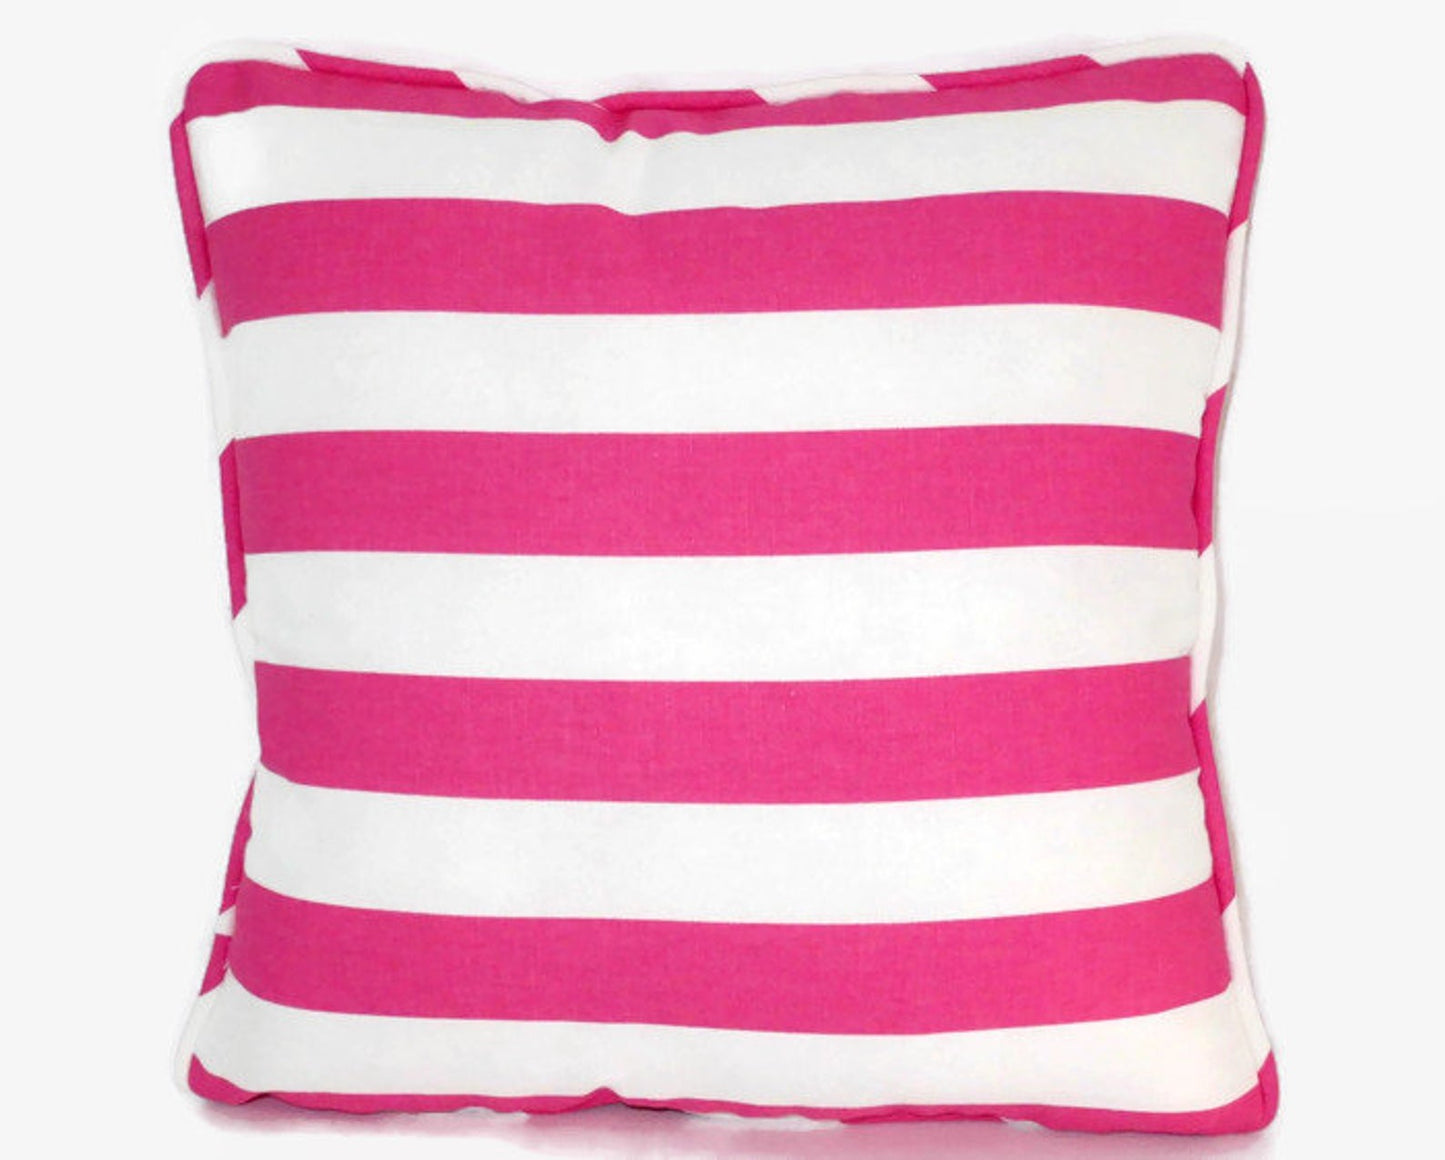 Hot pink and white awning stripe pillow cover